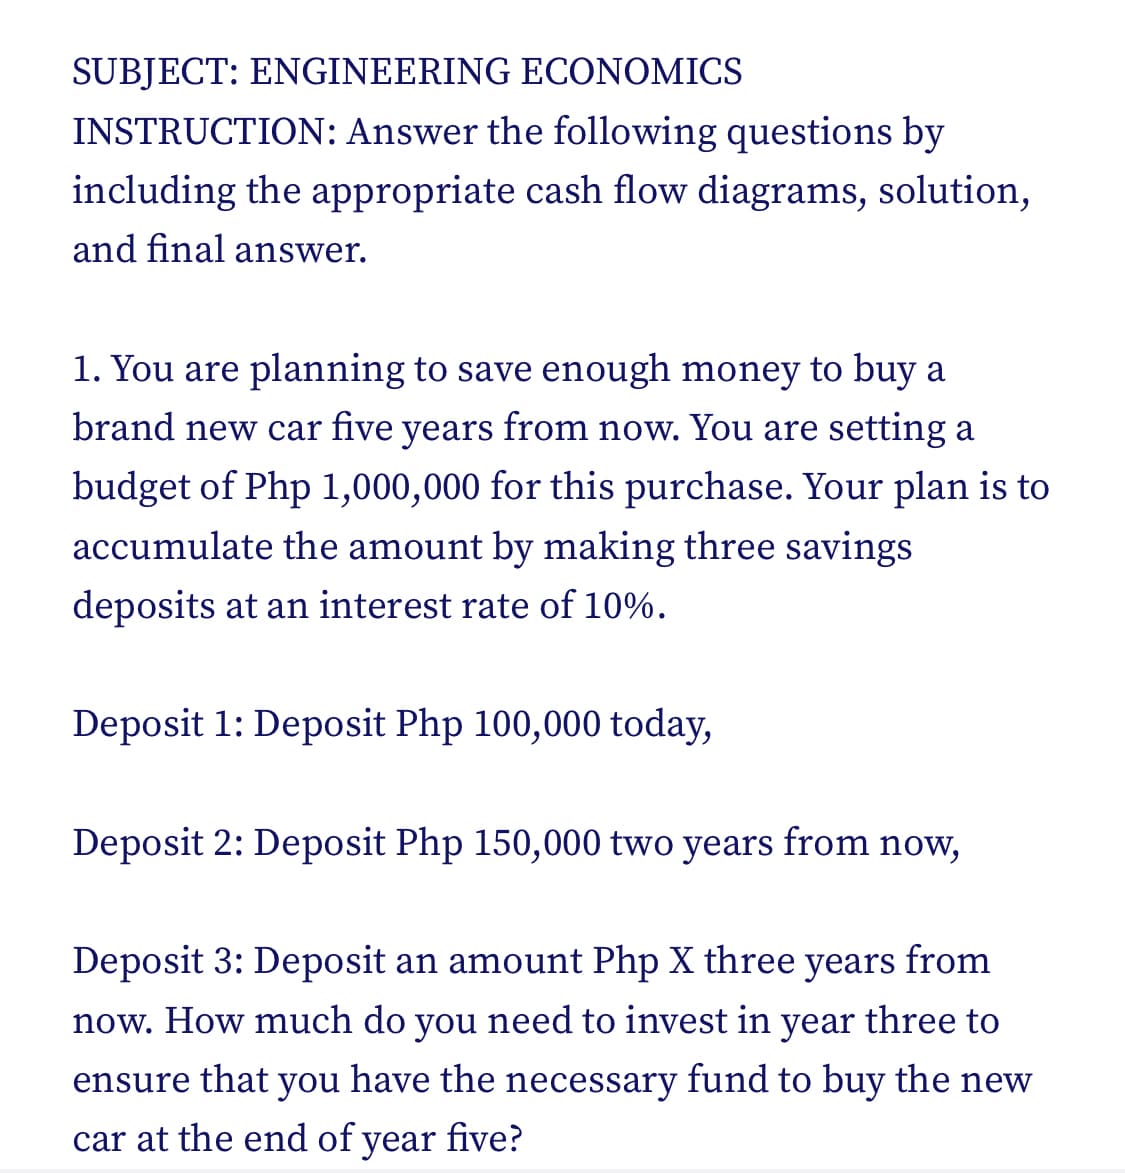 SUBJECT: ENGINEERING ECONOMICS
INSTRUCTION: Answer the following questions by
including the appropriate cash flow diagrams, solution,
and final answer.
1. You are planning to save enough money to buy a
brand new car five years from now. You are setting a
budget of Php 1,000,000 for this purchase. Your plan is to
accumulate the amount by making three savings
deposits at an interest rate of 10%.
Deposit 1: Deposit Php 100,000 today,
Deposit 2: Deposit Php 150,000 two years from now,
Deposit 3: Deposit an amount Php X three years from
now. How much do you need to invest in year three to
ensure that you have the necessary fund to buy the new
car at the end of year five?